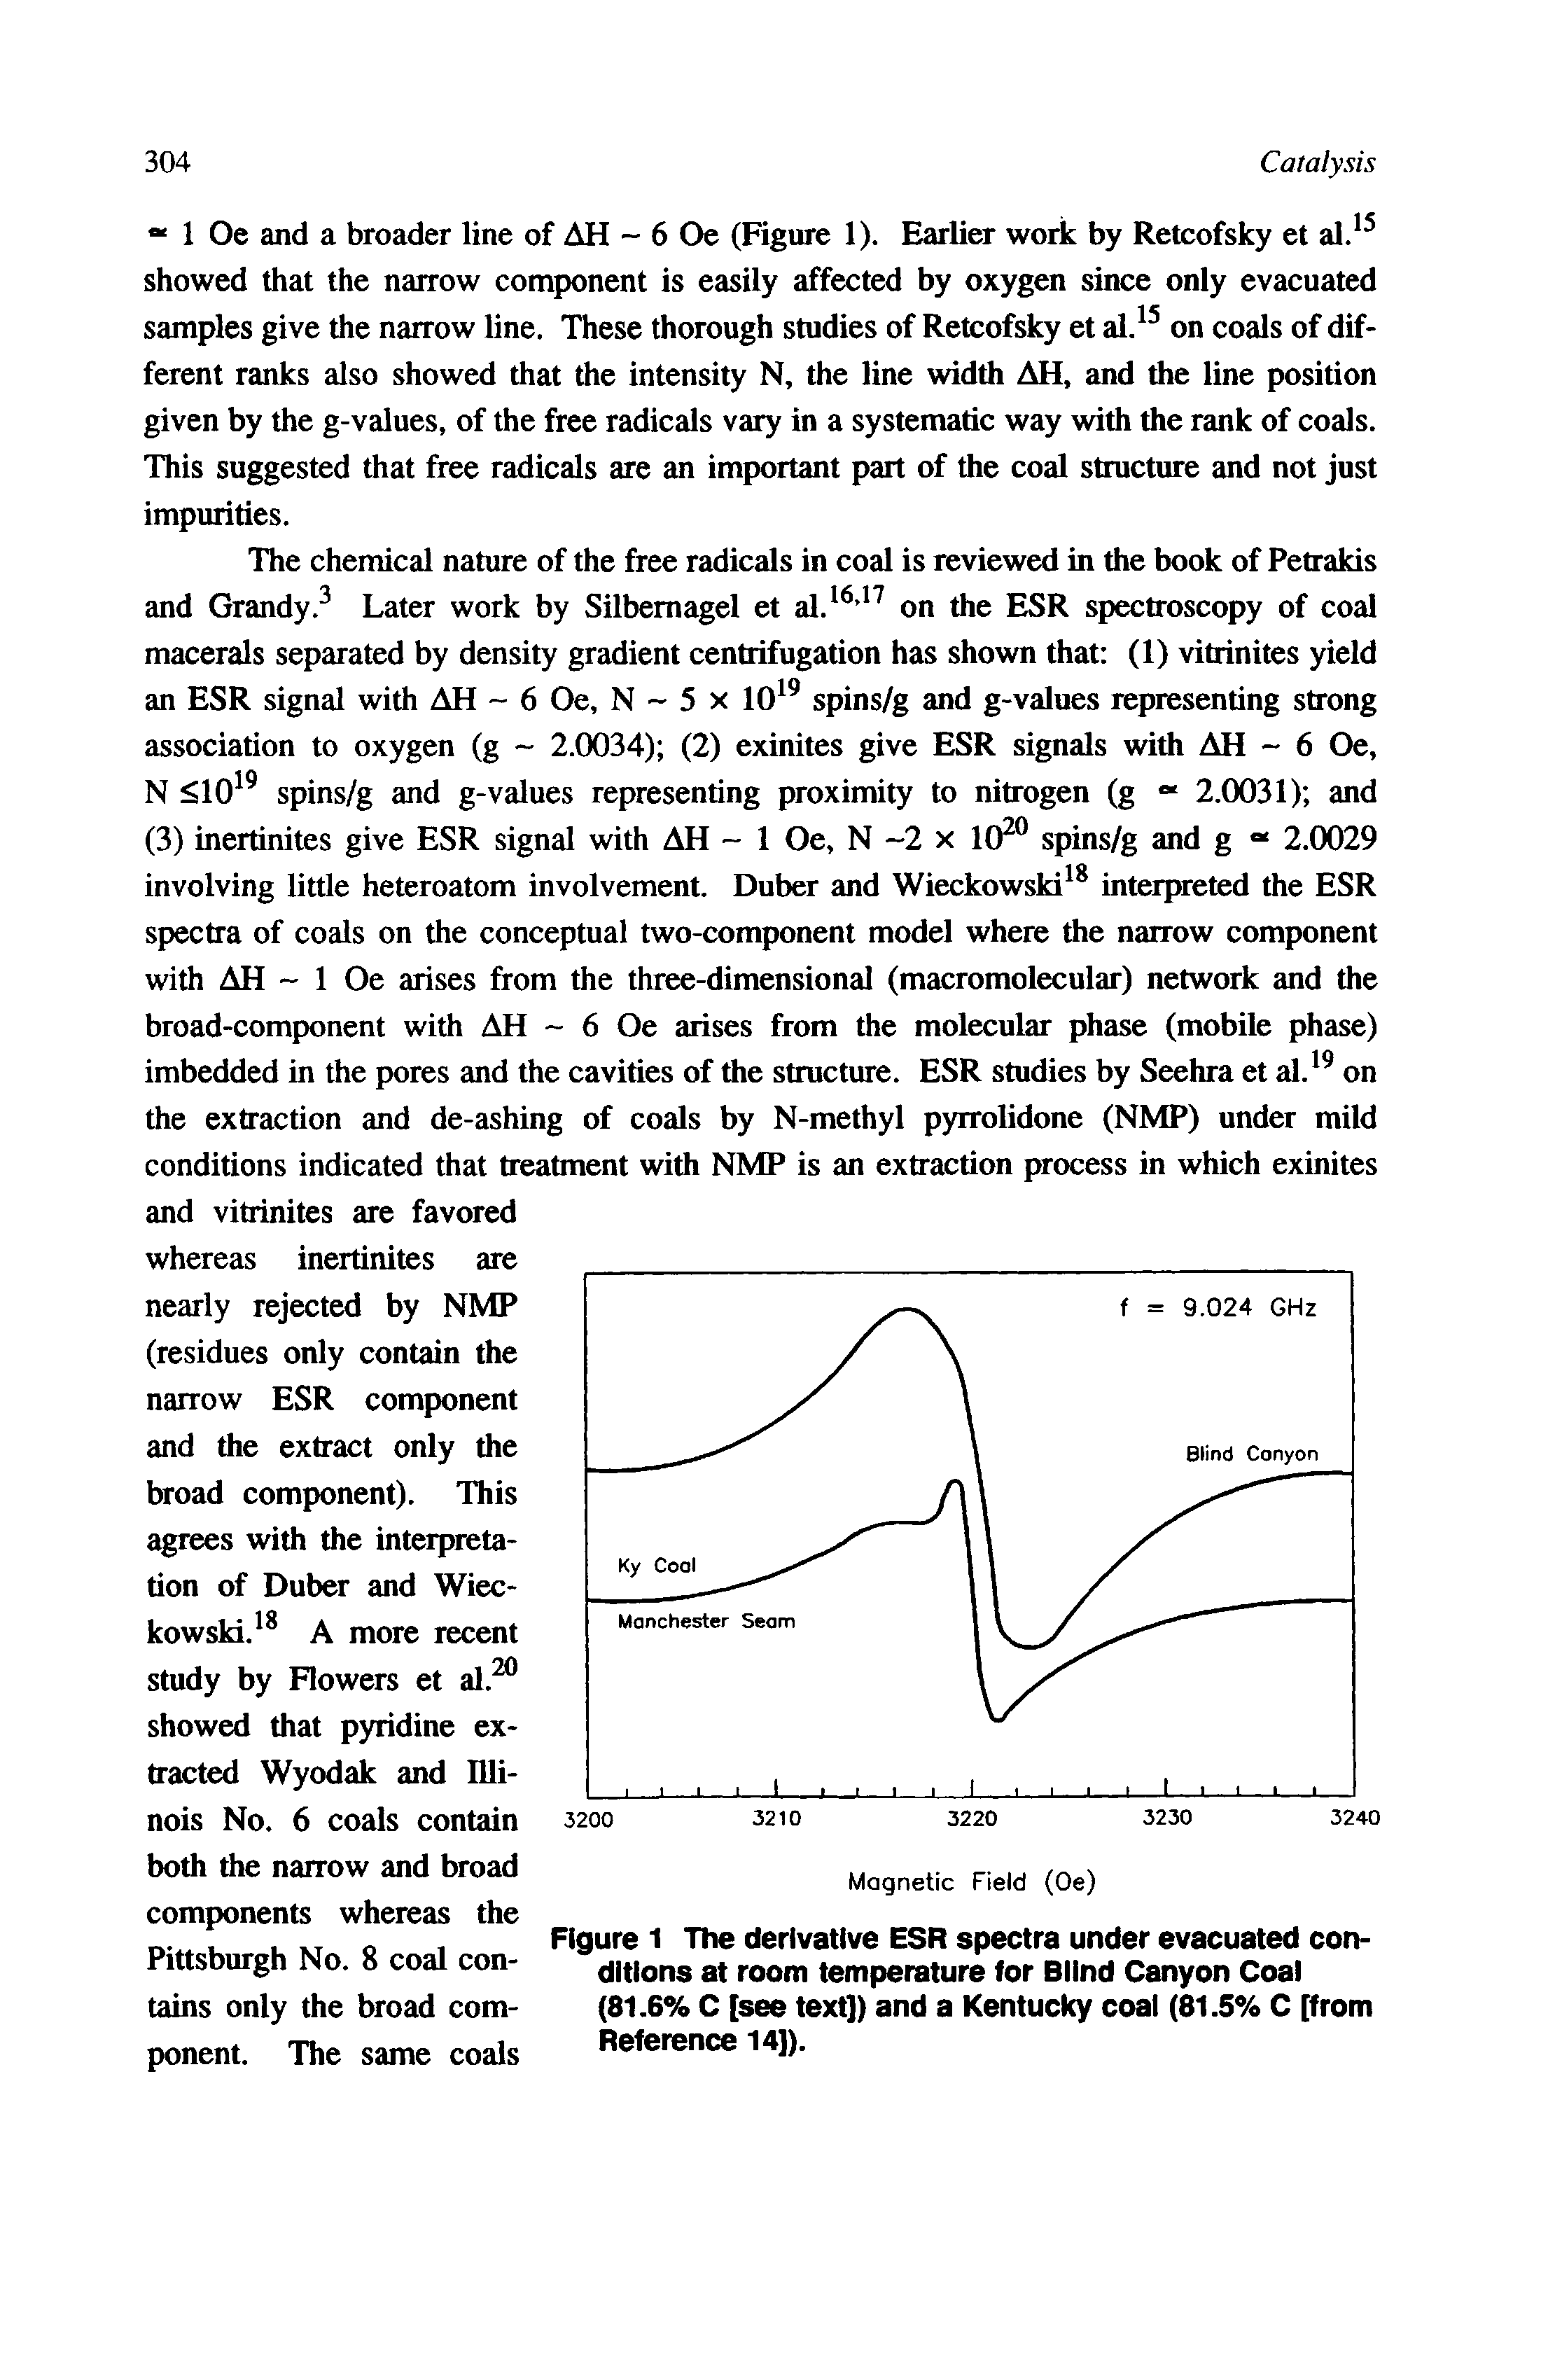 Figure 1 The derivative ESR spectra under evacuated conditions at room temperature for Blind Canyon Coal (81.6% C [see text]) and a Kentucky coal (81.5% C [from Reference 14]).